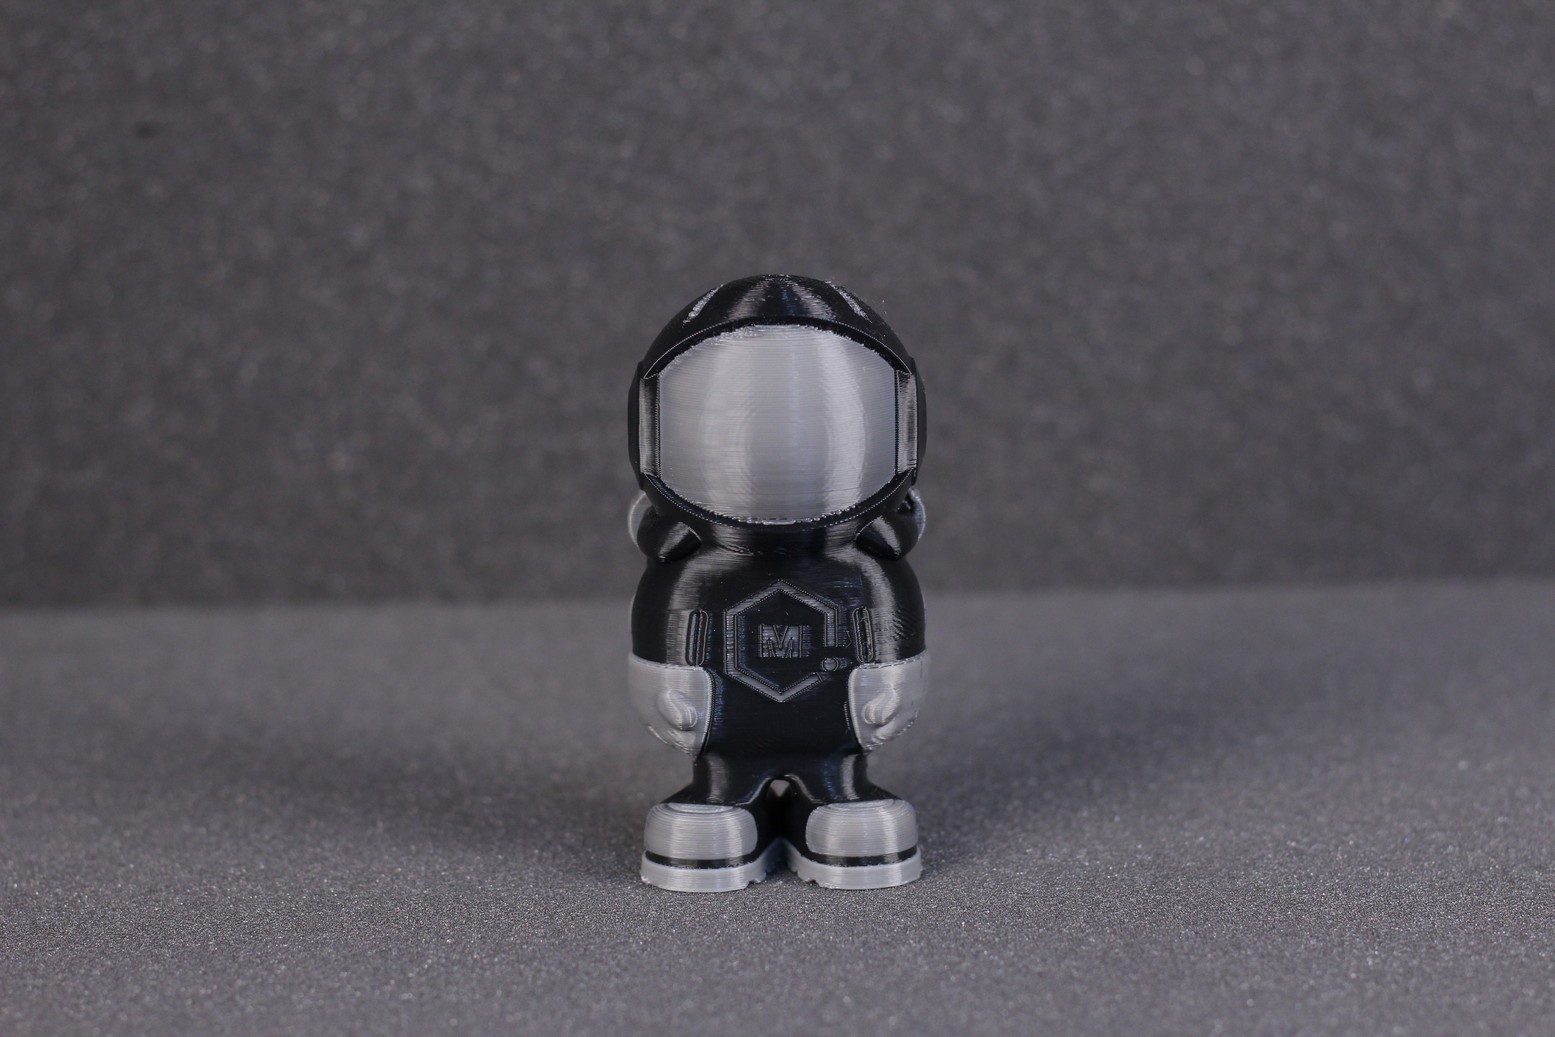 Phil A Ment Dual Color print on SC 10 Shark V2 2 | LOTMAXX SC-10 Shark V2 Review: Dual Color Printing and Laser Engraving